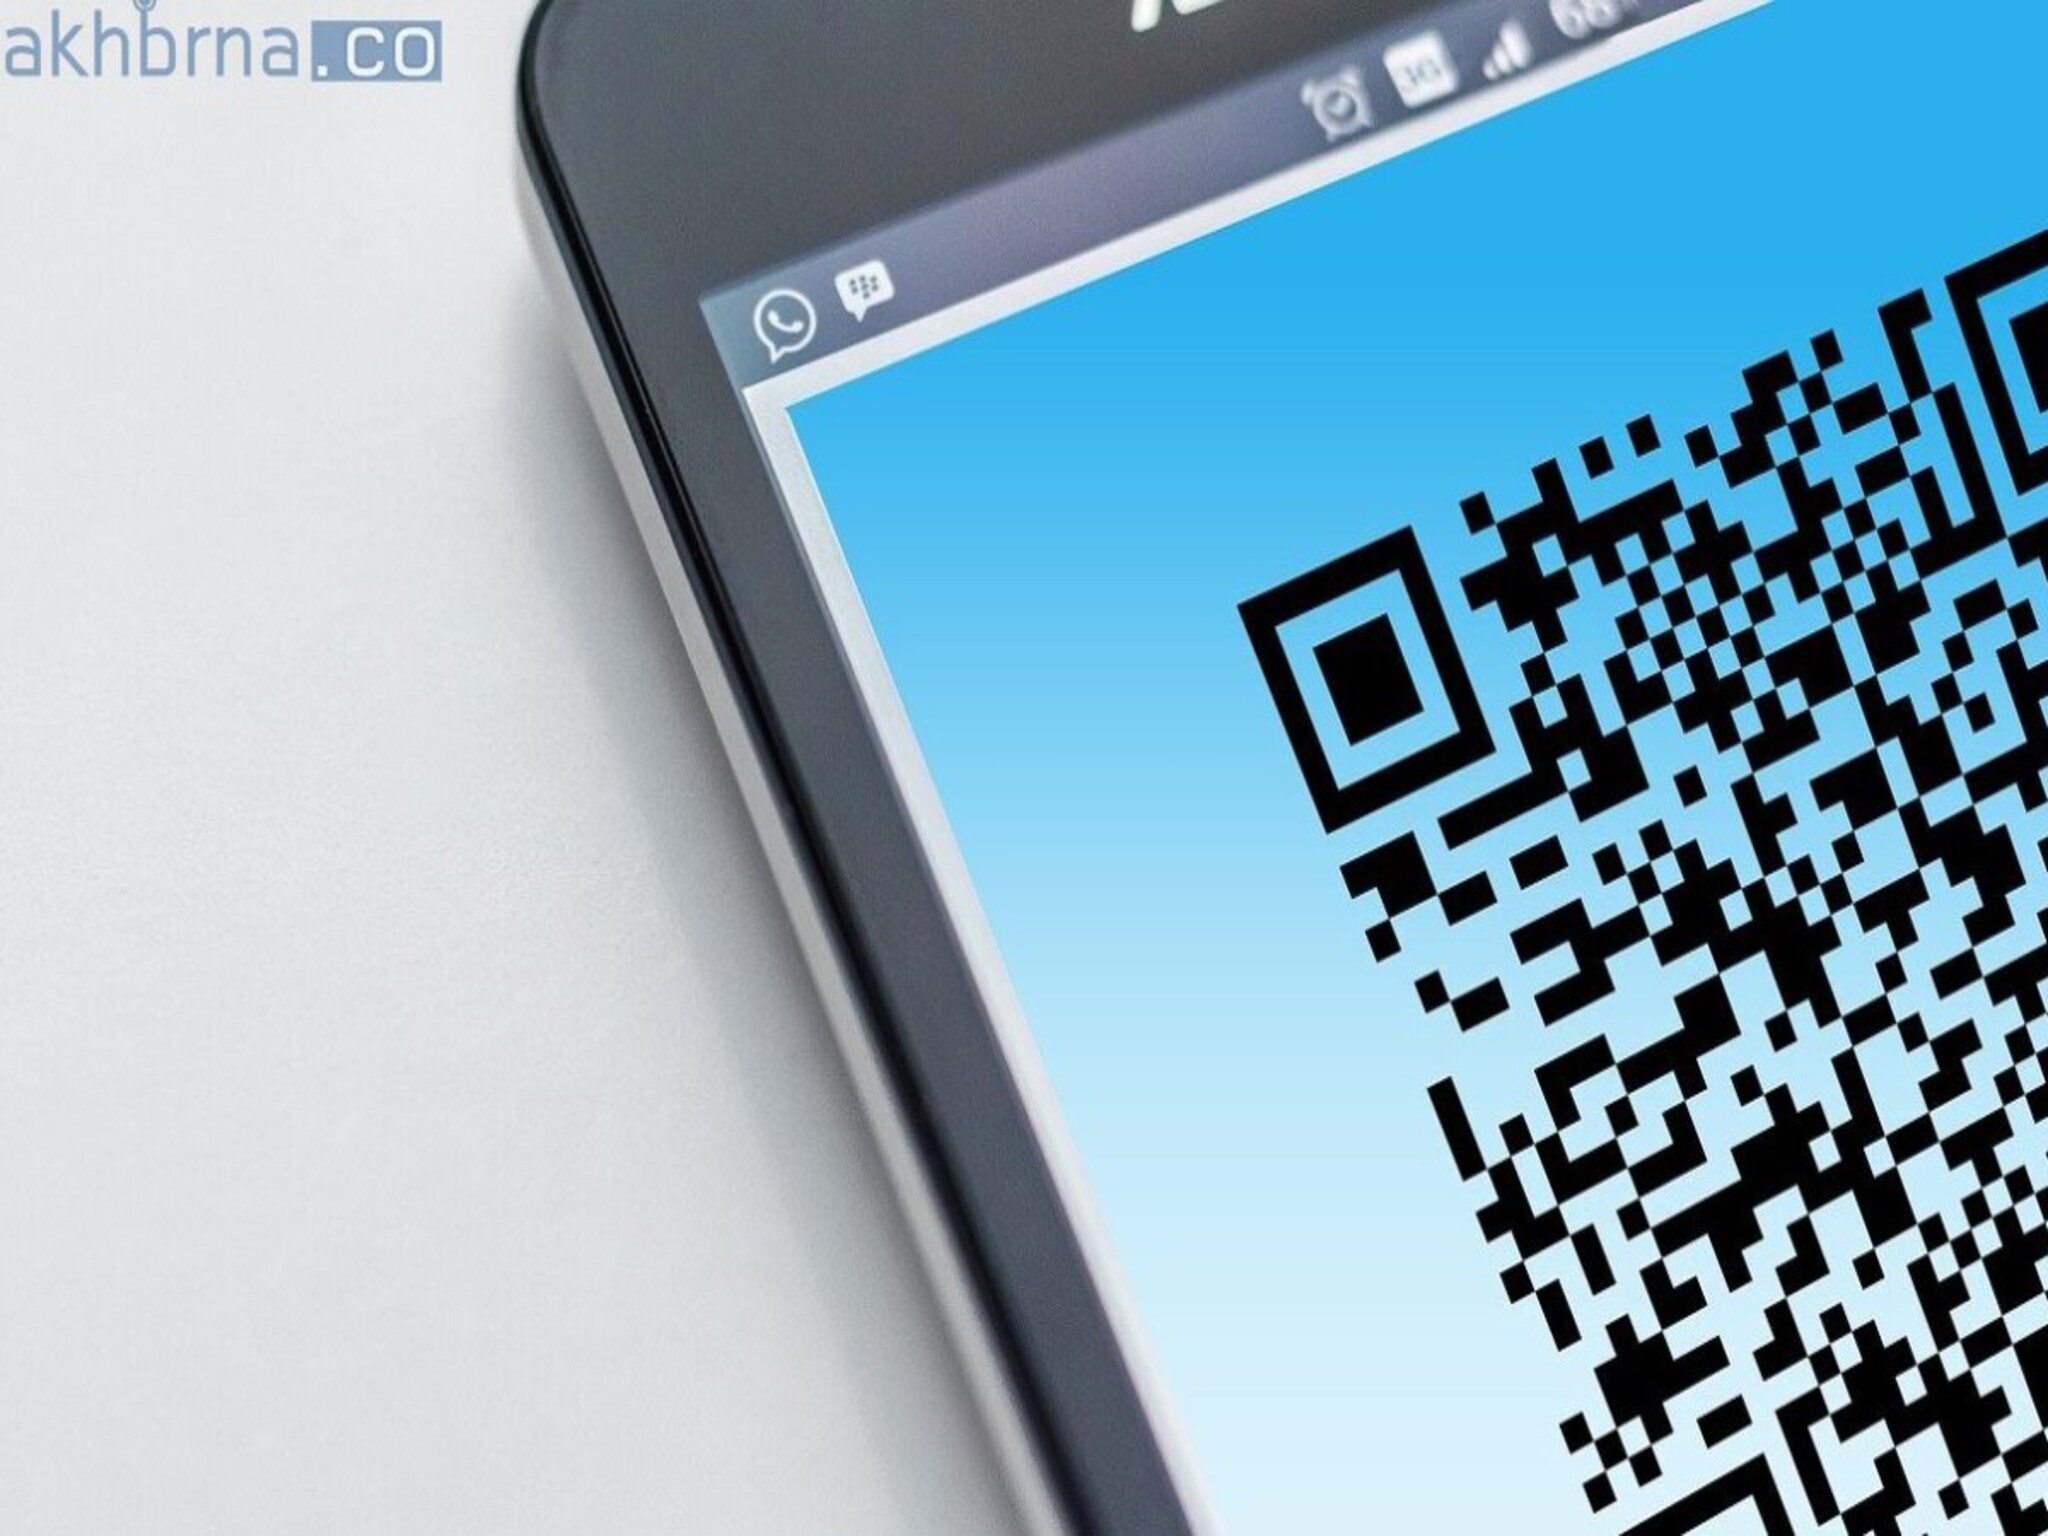 UAE Authority Issues Warning Against QR Code Frauds and Fake Websites